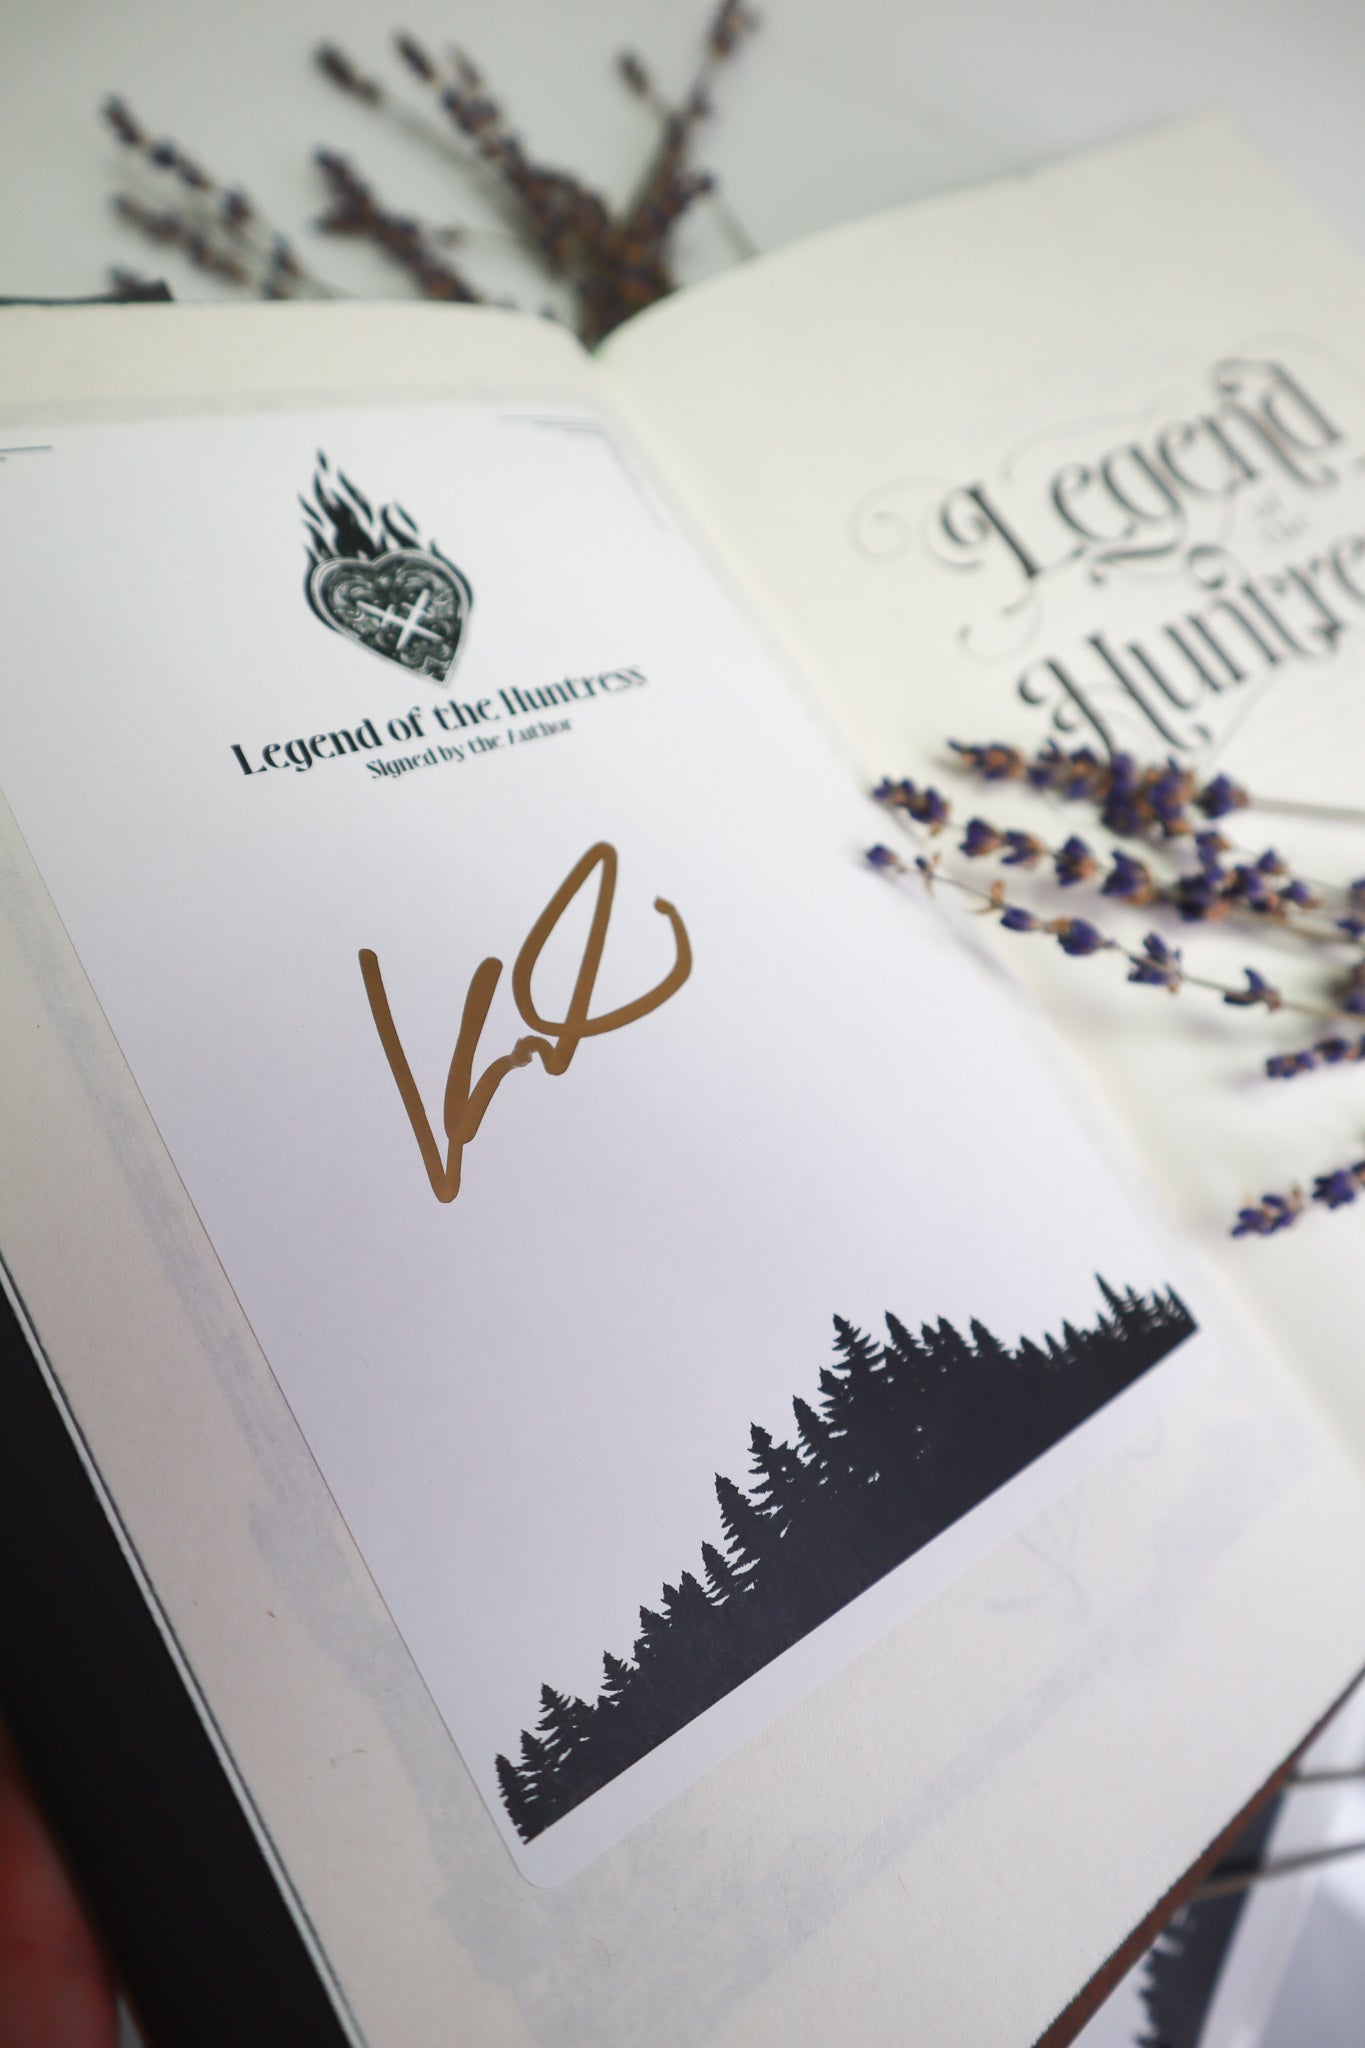 Legend of the Huntress Special Edition WITH Signed by the Author Bookplate Label